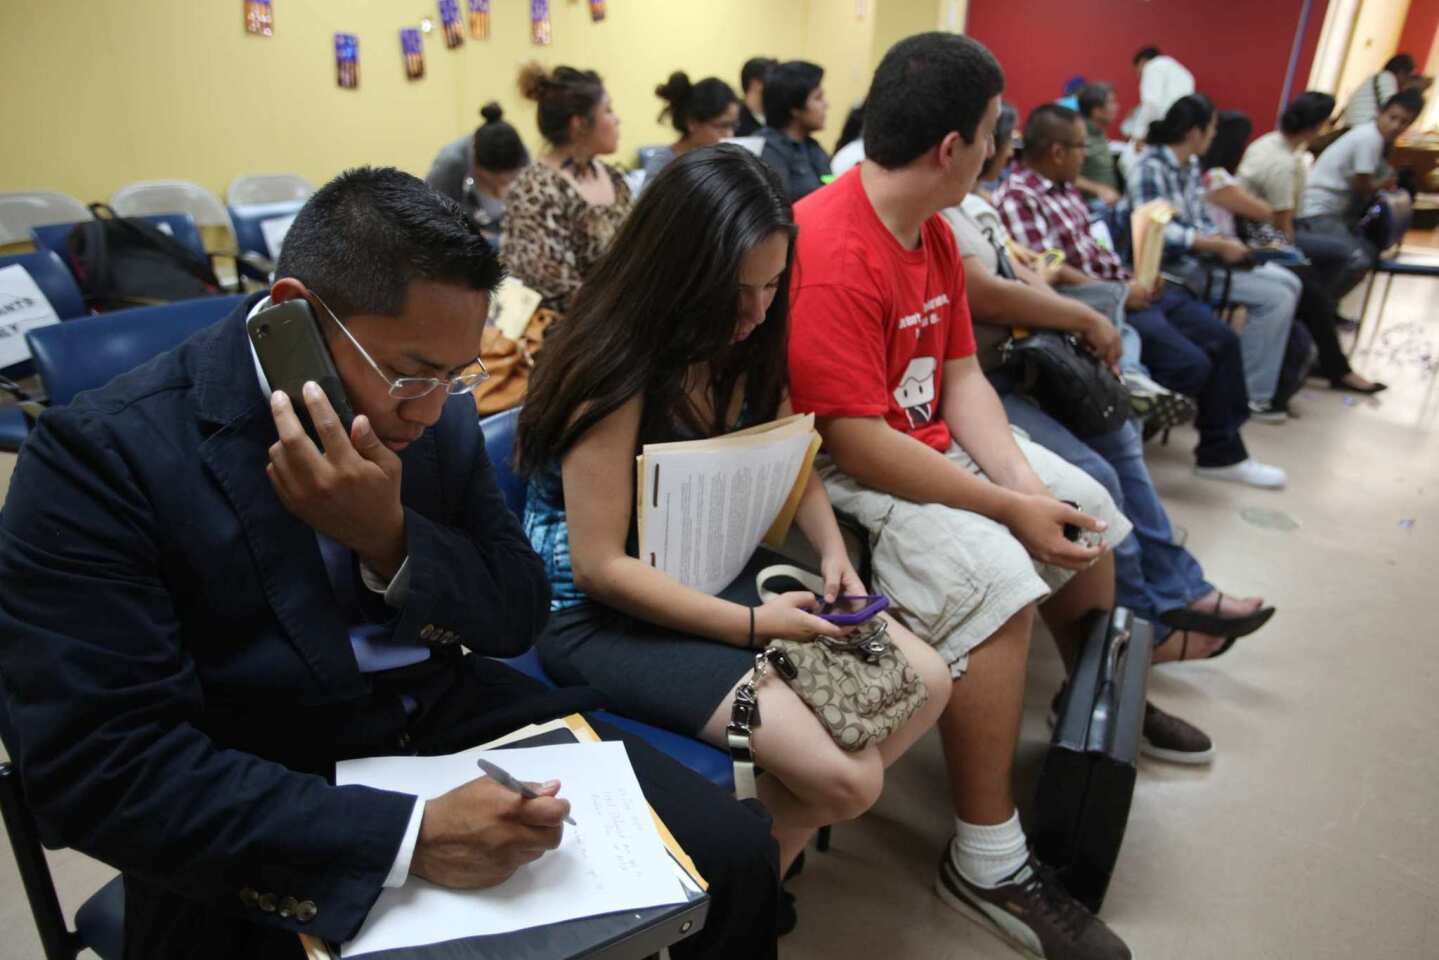 Rigoberto Barboza, left, of La Puente takes notes as he waits to fill out paperwork at the Coalition for Humane Immigrant Rights of Los Angeles. He says he is a attending college and has been in the U.S. since age 11.